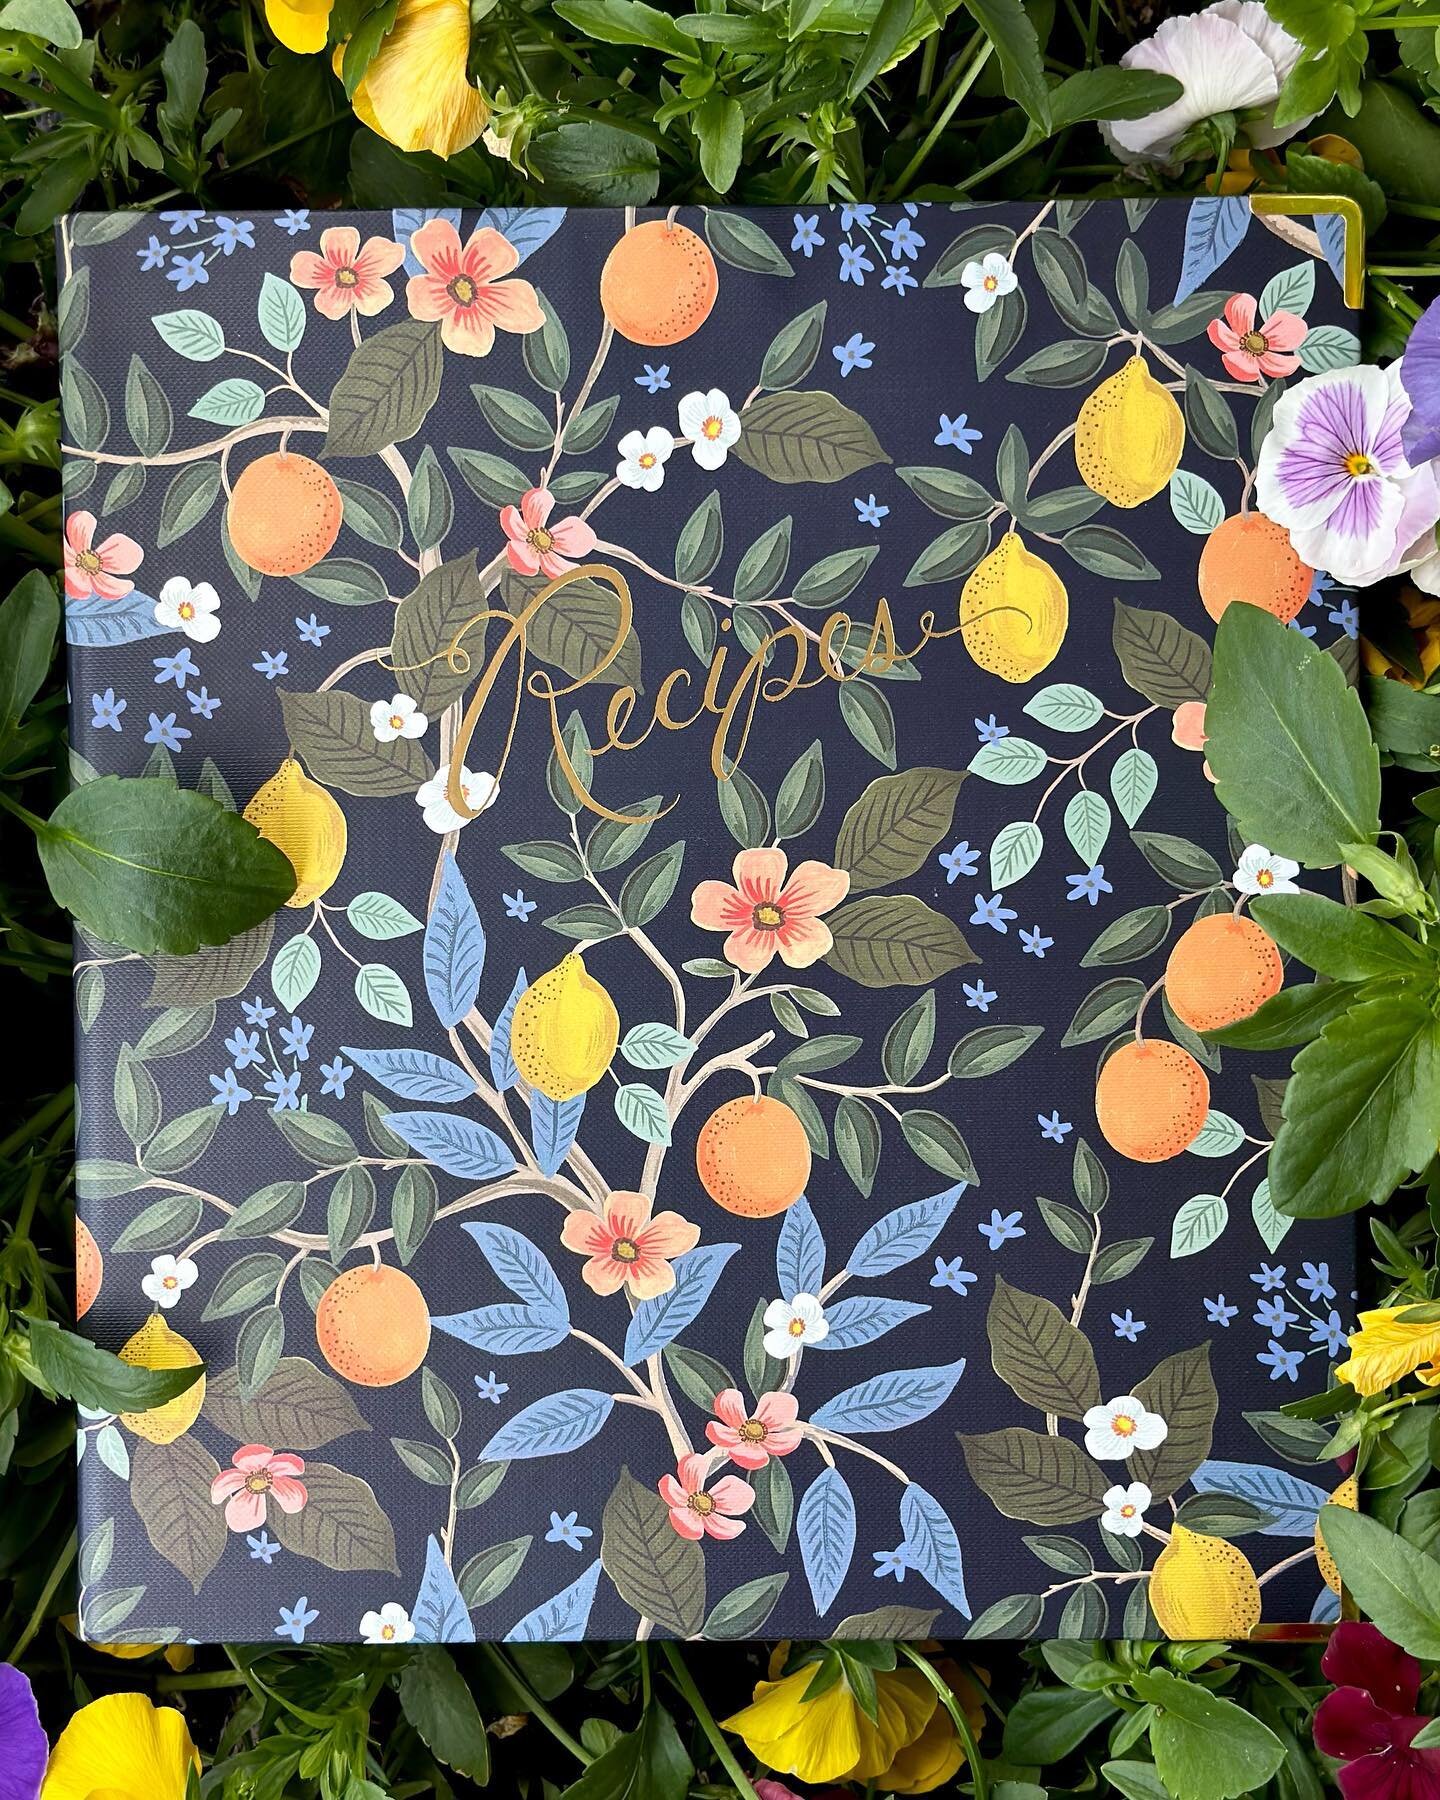 We have been searching for recipe binders that were beautiful and FINALLY, we are so excited that @riflepaperco has put one out. Not too old fashioned, not too modern, simply classic and smile inducing - this makes a wonderful gift for Mom&rsquo;s, b